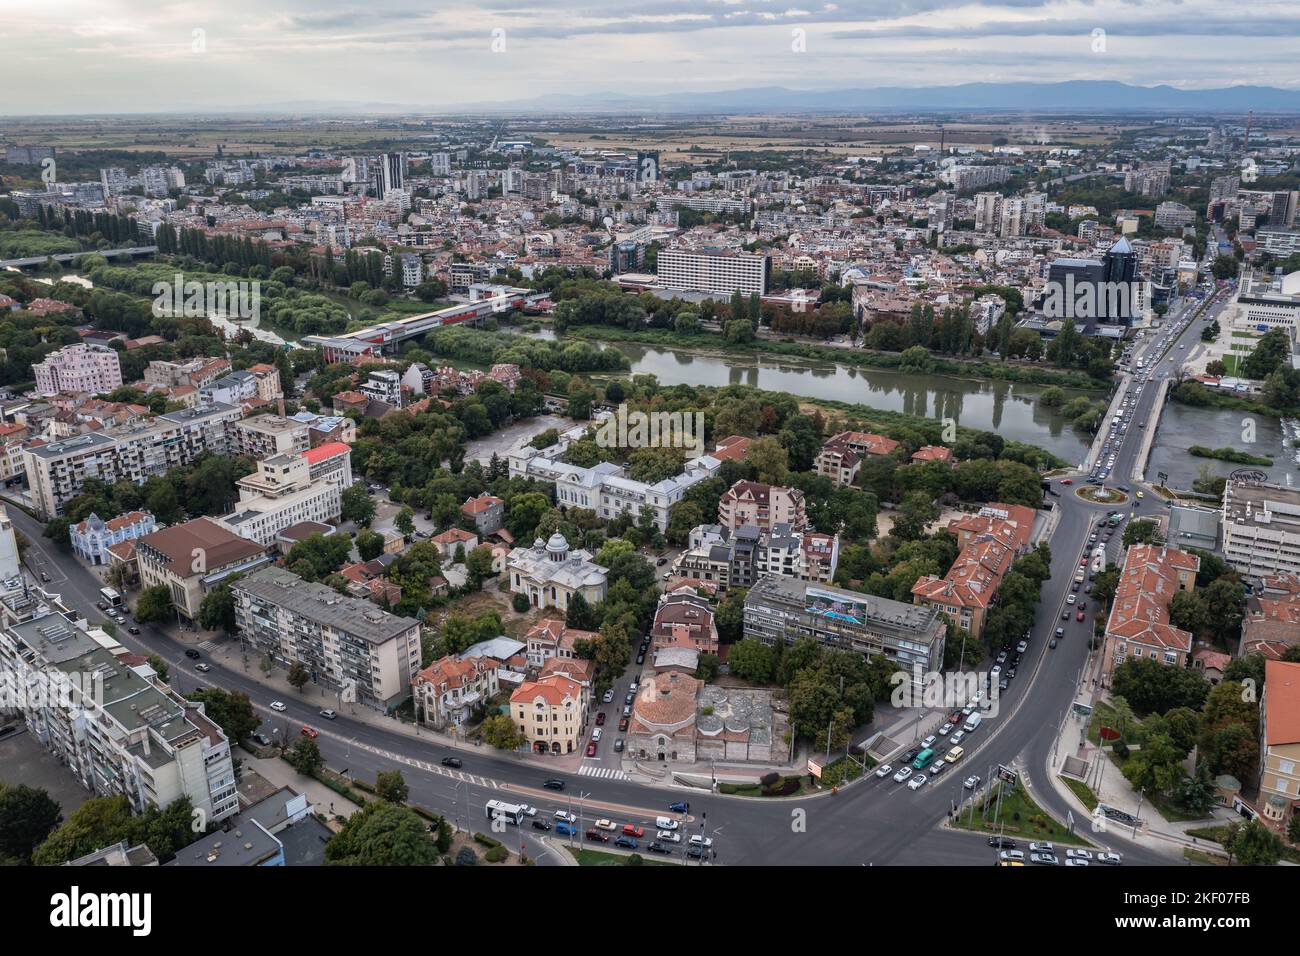 Aerial view of Plovdiv city, capital of Plovdiv Province in south-central Bulgaria Stock Photo